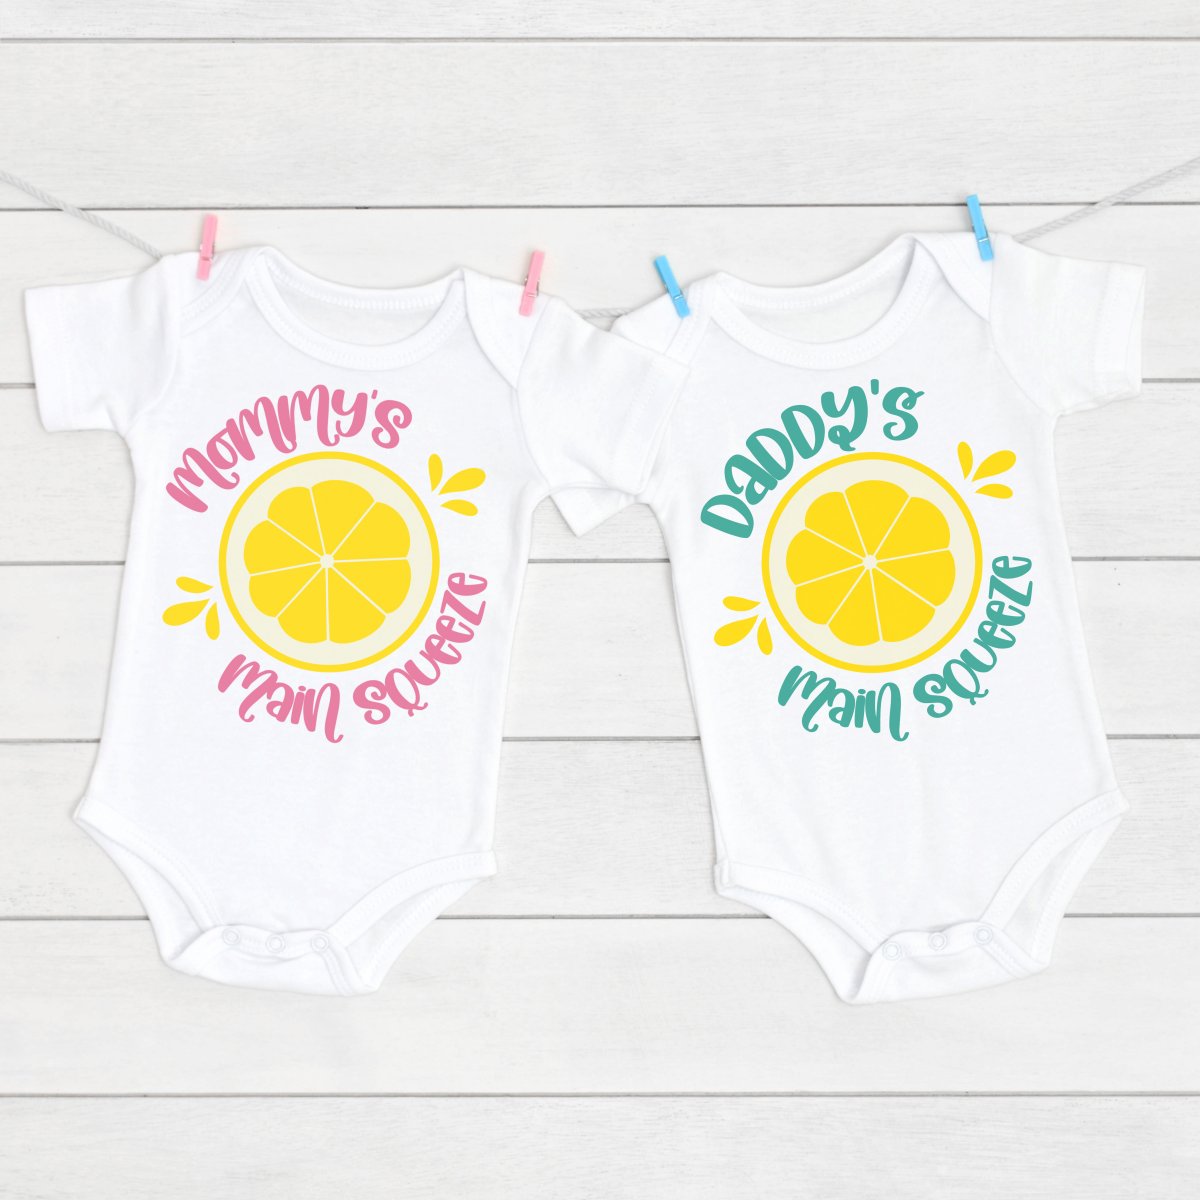 Show mom and dad how much they are loved with our free Daddy and Mommy Main Squeeze SVG files! Design adorable baby onesies, toddler shirts and more using your Cricut or other electronic cutting machine! Perfect for DIY coming home outfits and handmade Mother's Day, Father's Day and baby shower gifts! Also includes links to 8 free lemon and lemonade cut files!